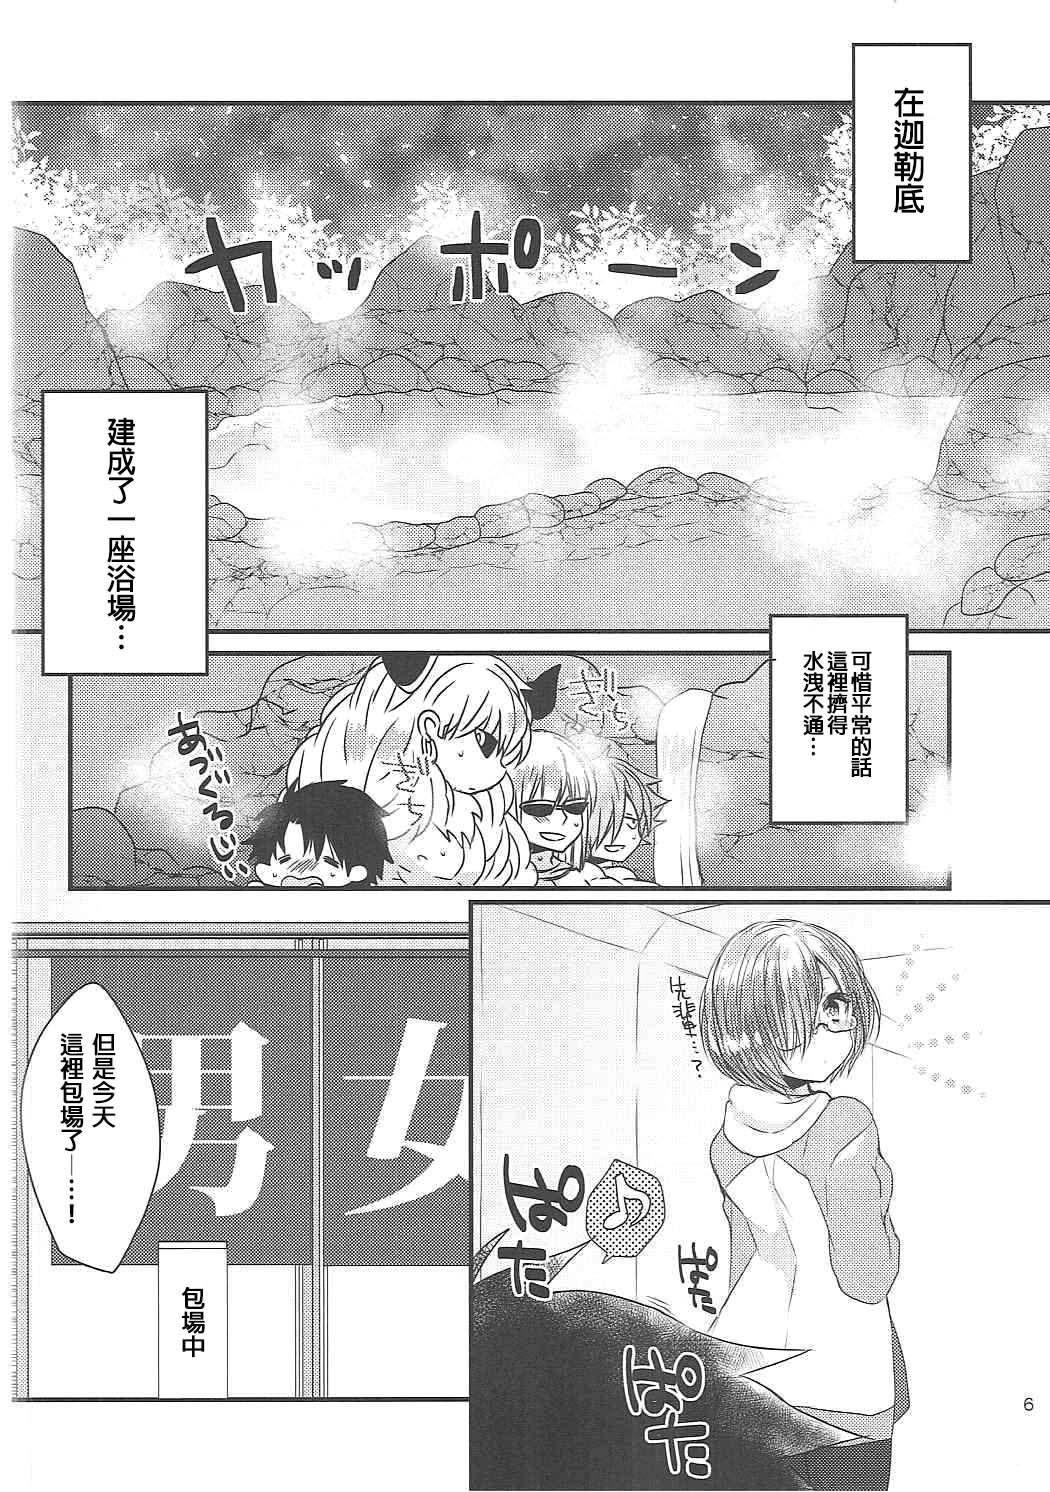 Topless Kiyohime to Love Love Ofuro Time - Fate grand order Strip - Page 6